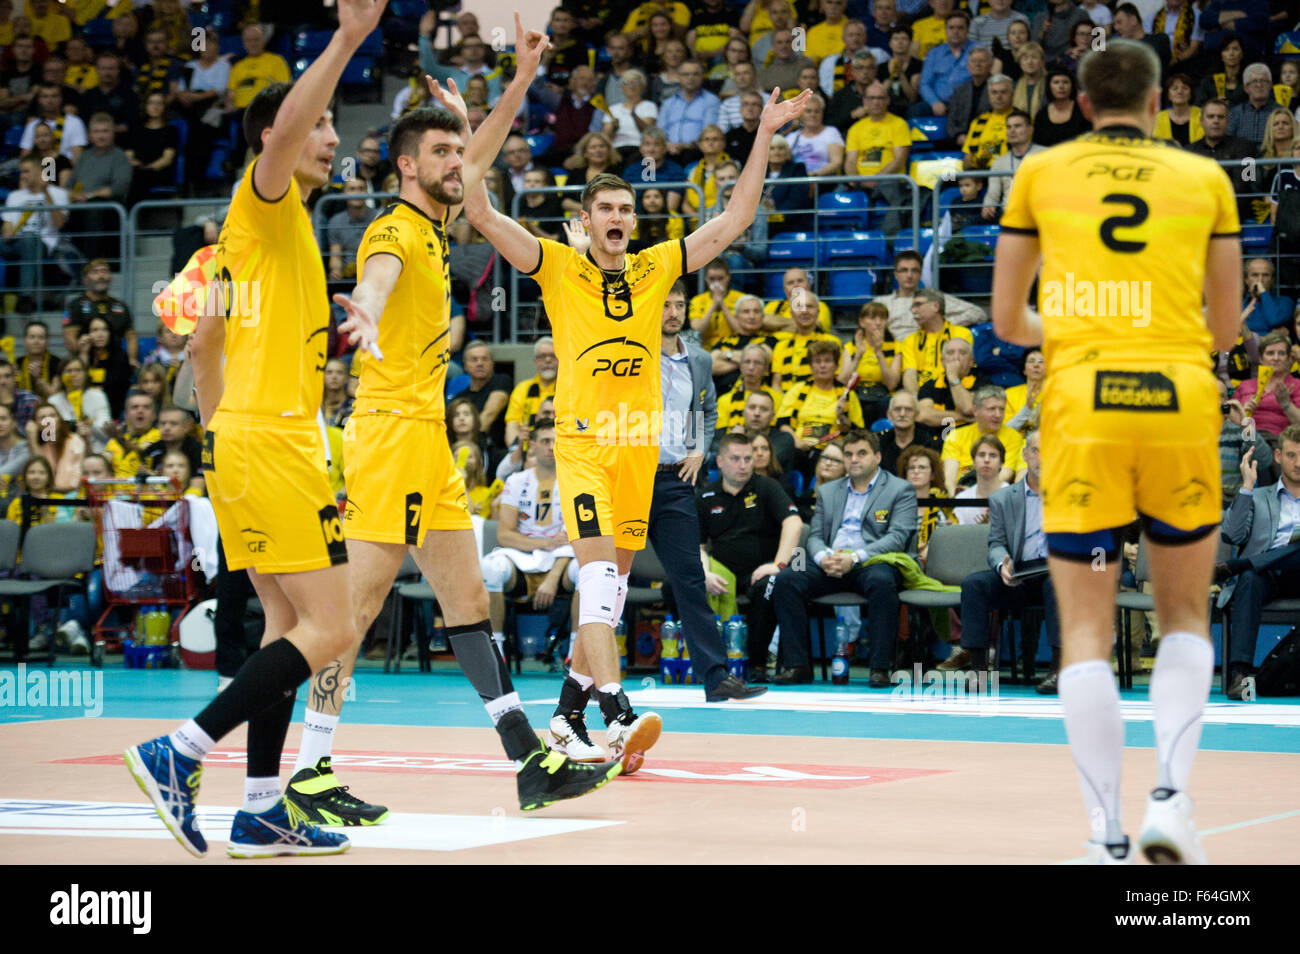 Belchatow, Poland. 11th November 2015. Team PGE Skra Belchatow pictured during the game with Asseco Resovia Rzeszow in Plus Liga (Polish Professional Volleyball League). Stock Photo